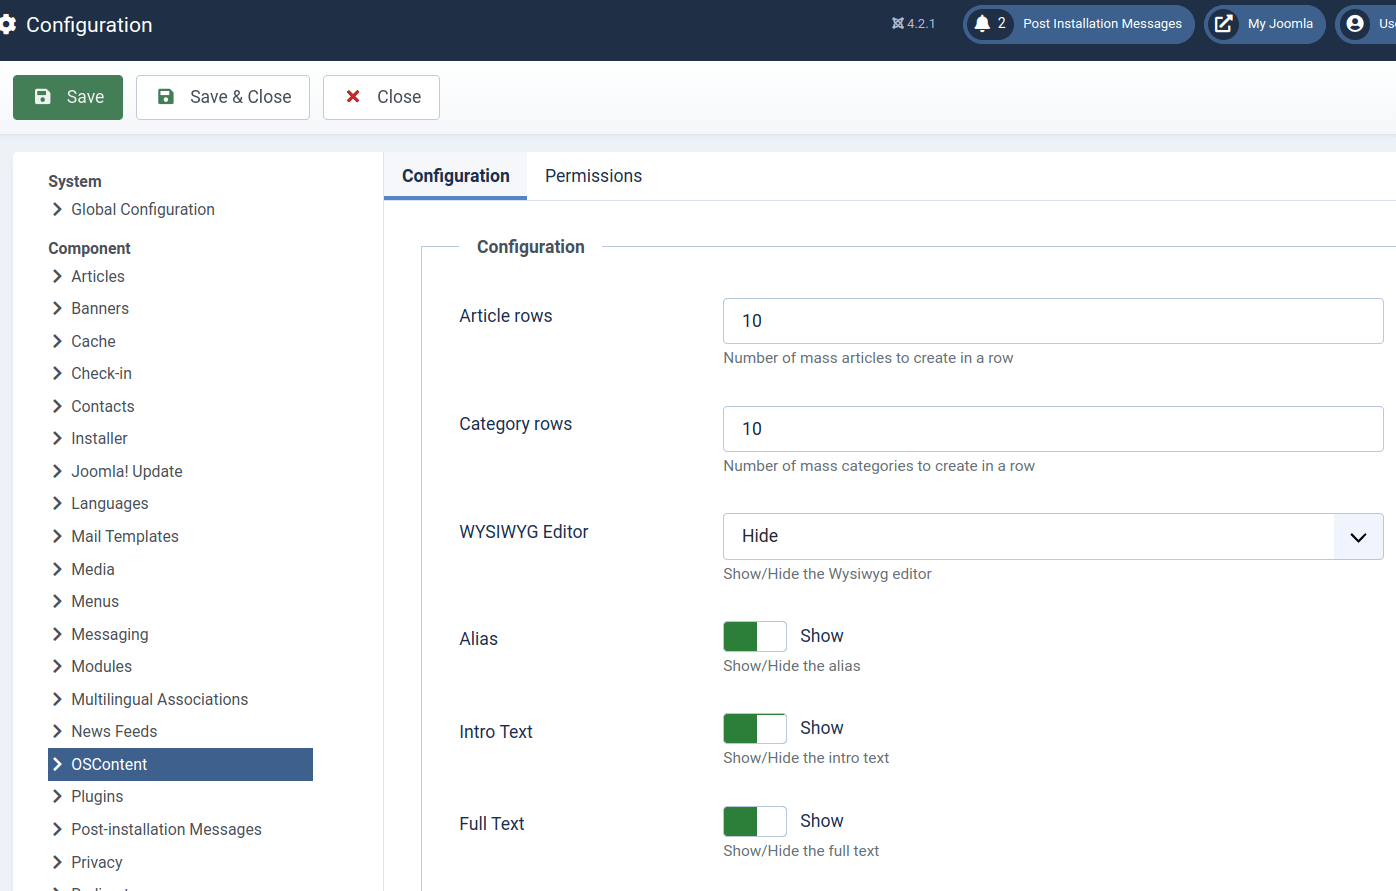 the oscontent global configuration options